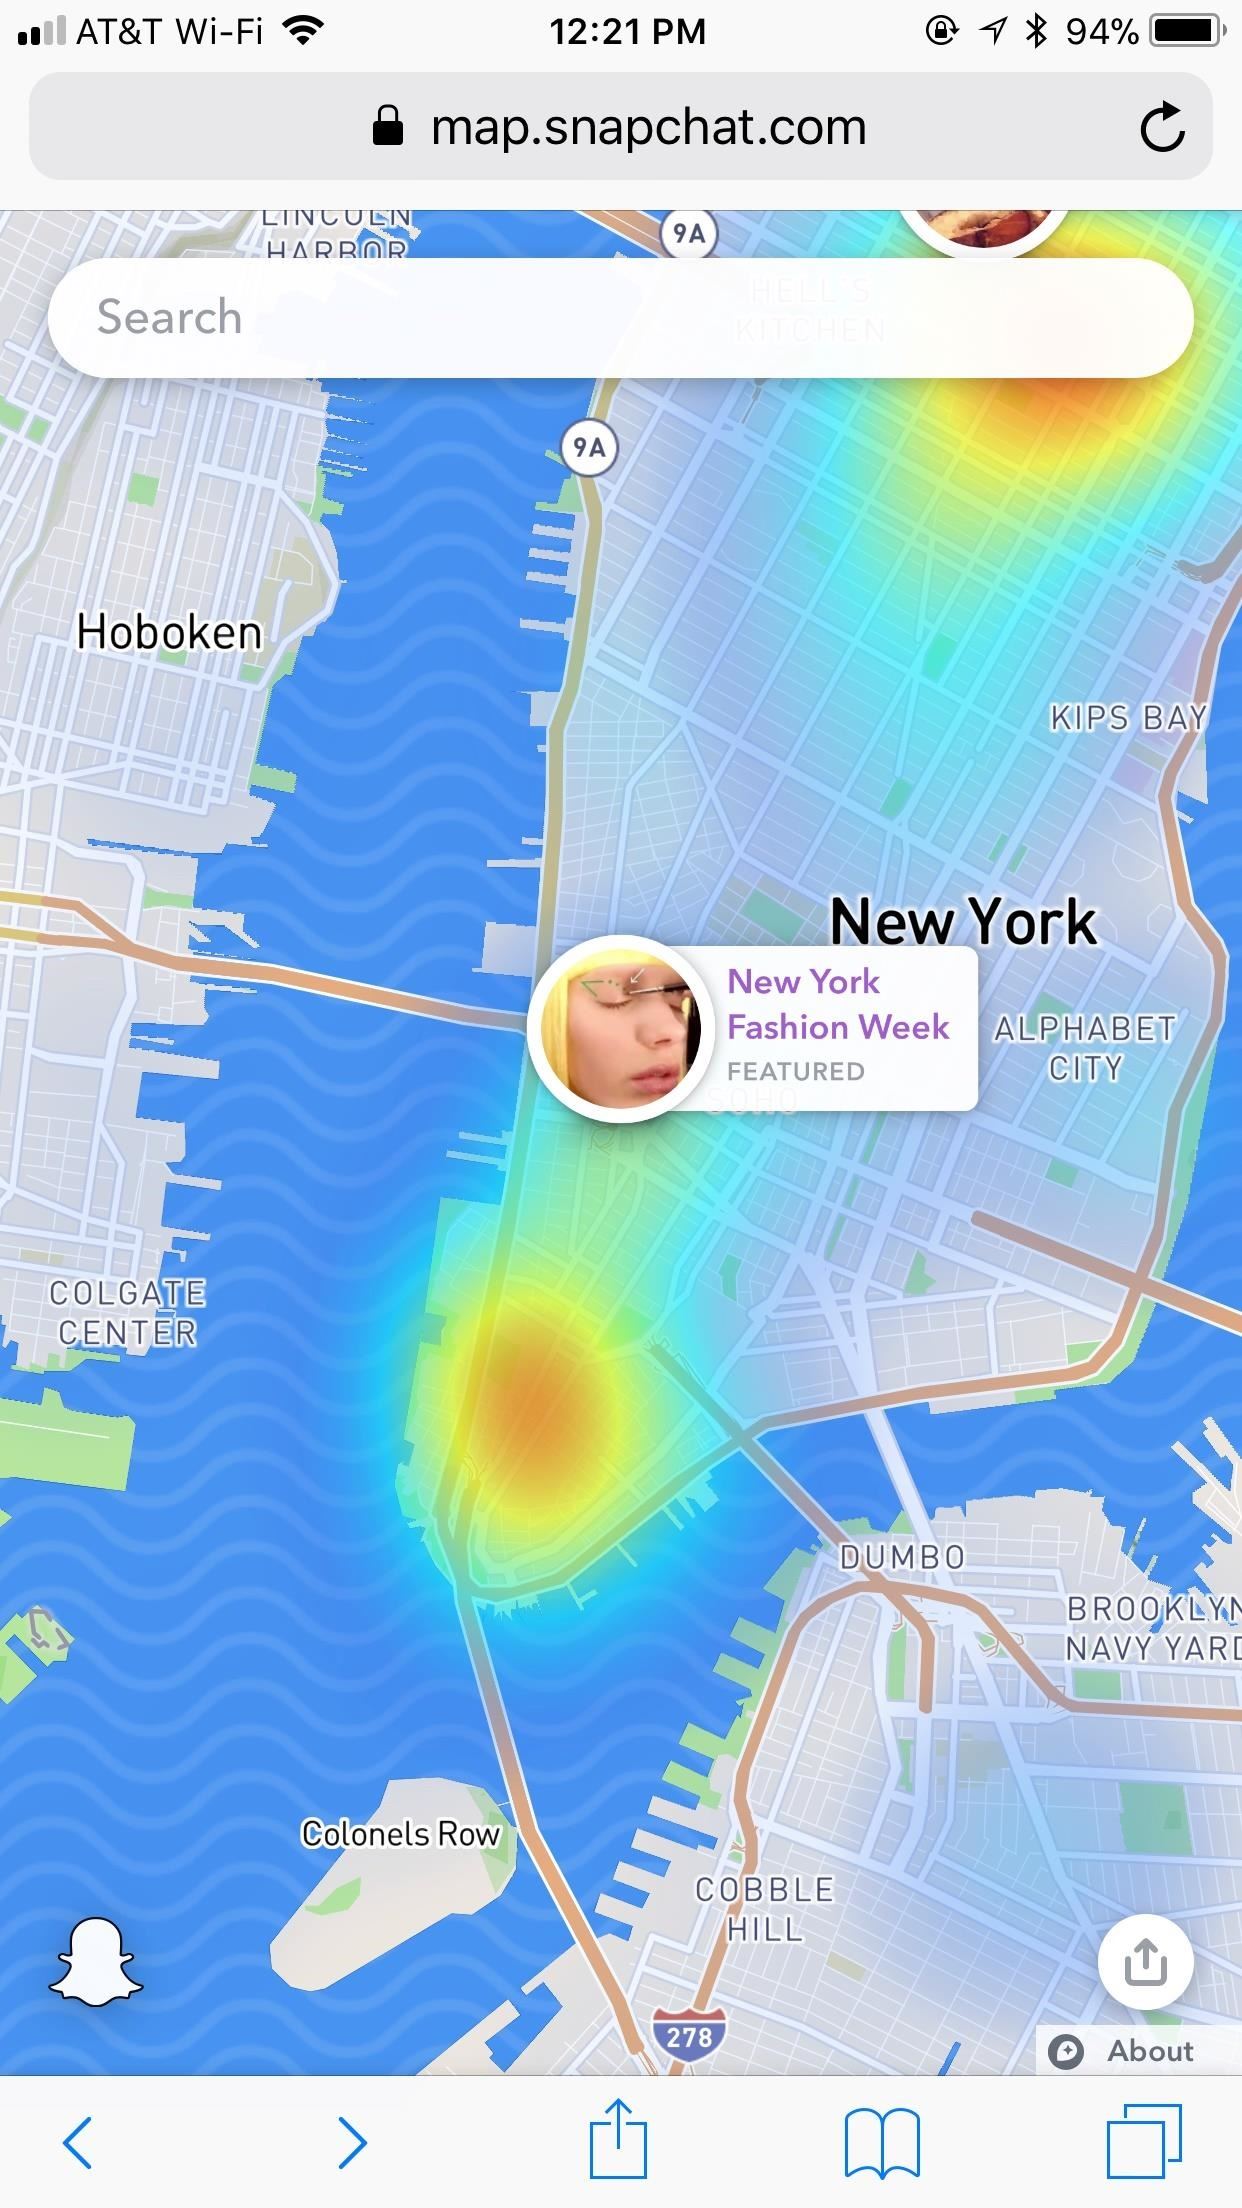 Snapchat 101: How to Use the Snap Map Without an Account